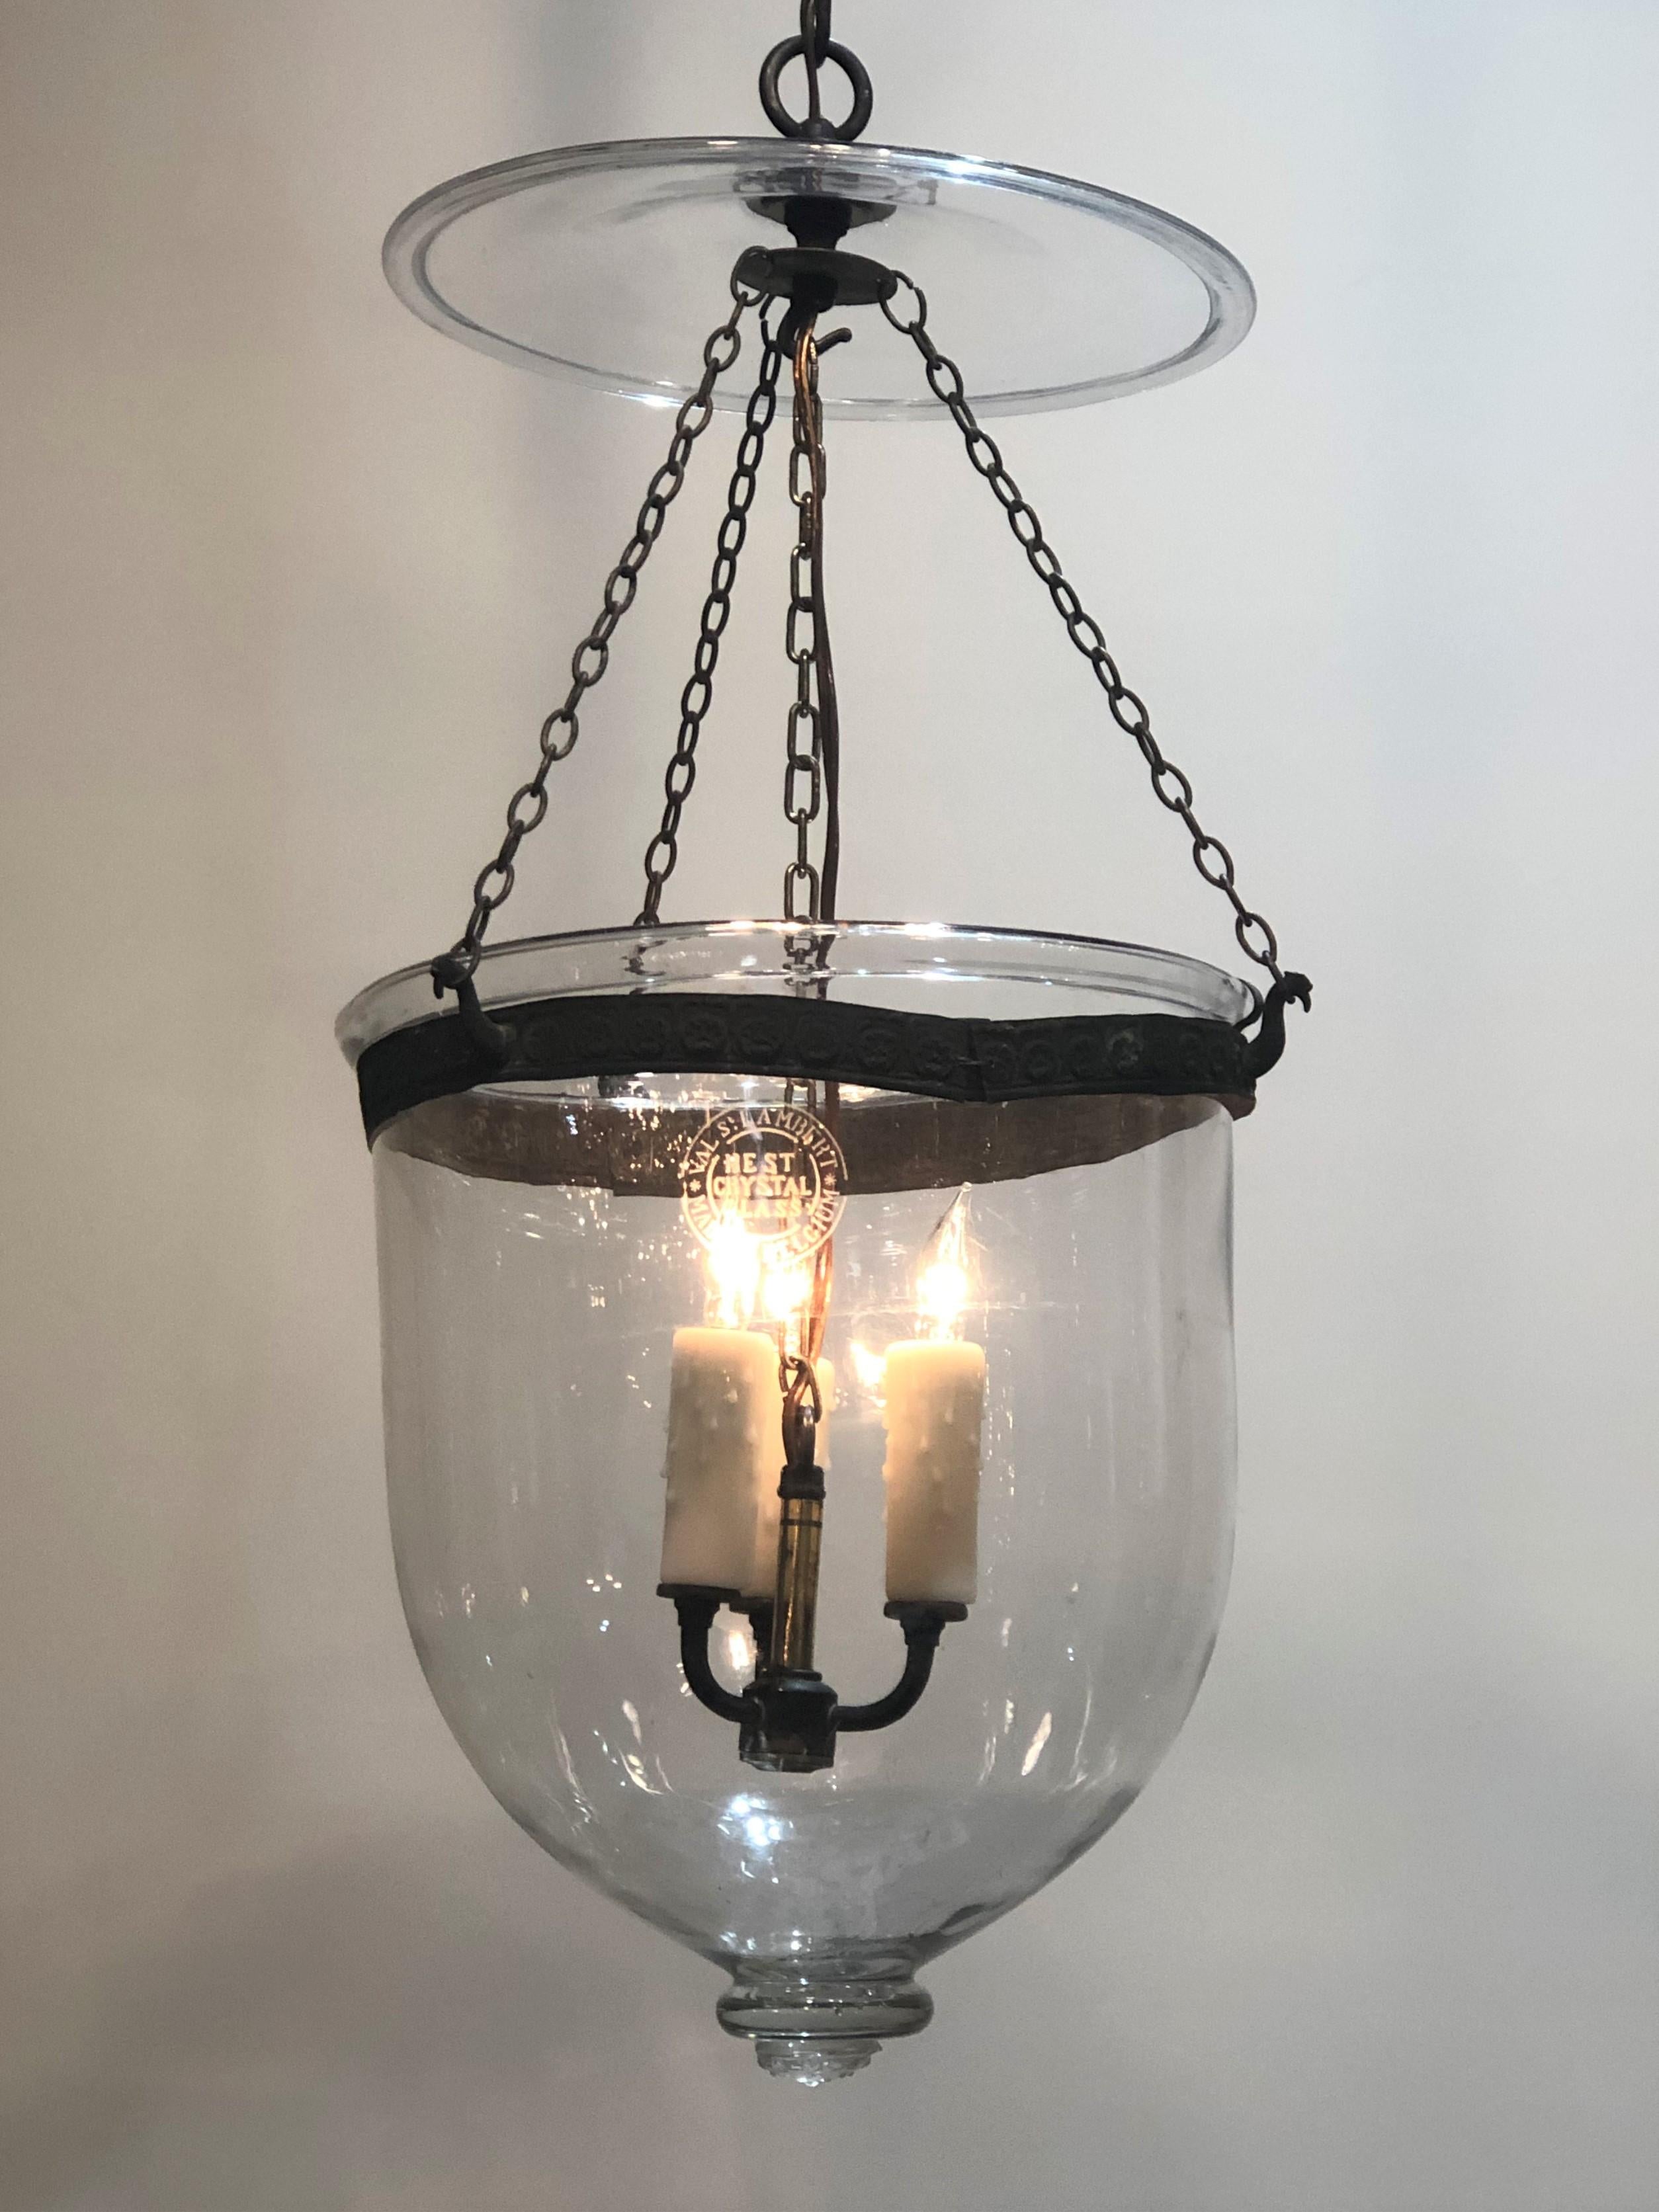 19th century Bell Jar lantern signed Val St. Lambert in the crystal Bell Jar. The Bell Jar is hanging by a pressed brass ring with three bird heads. The bird heads are suspended from three brass chains going up to a crystal smoke bell. The Bell Jar